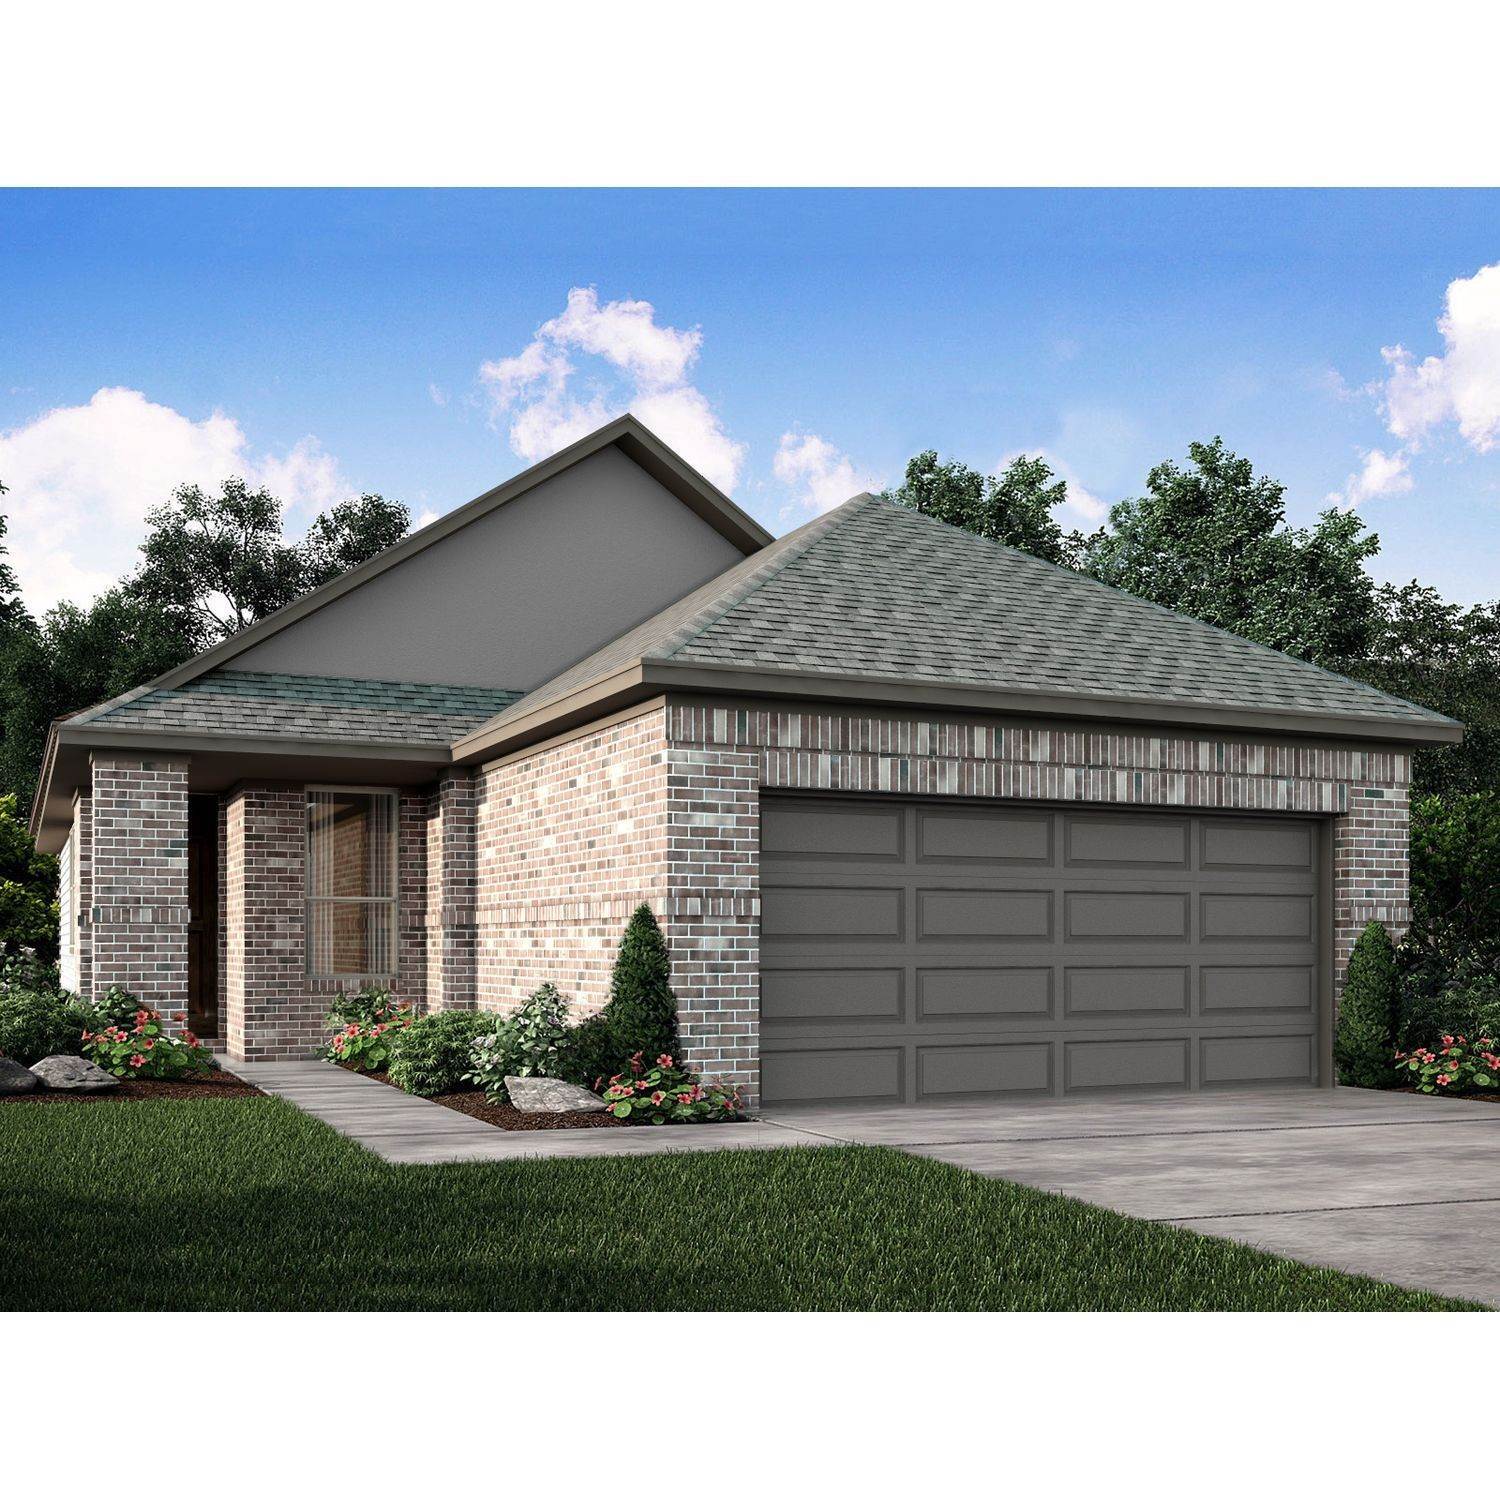 Single Family for Sale at Conroe, TX 77385